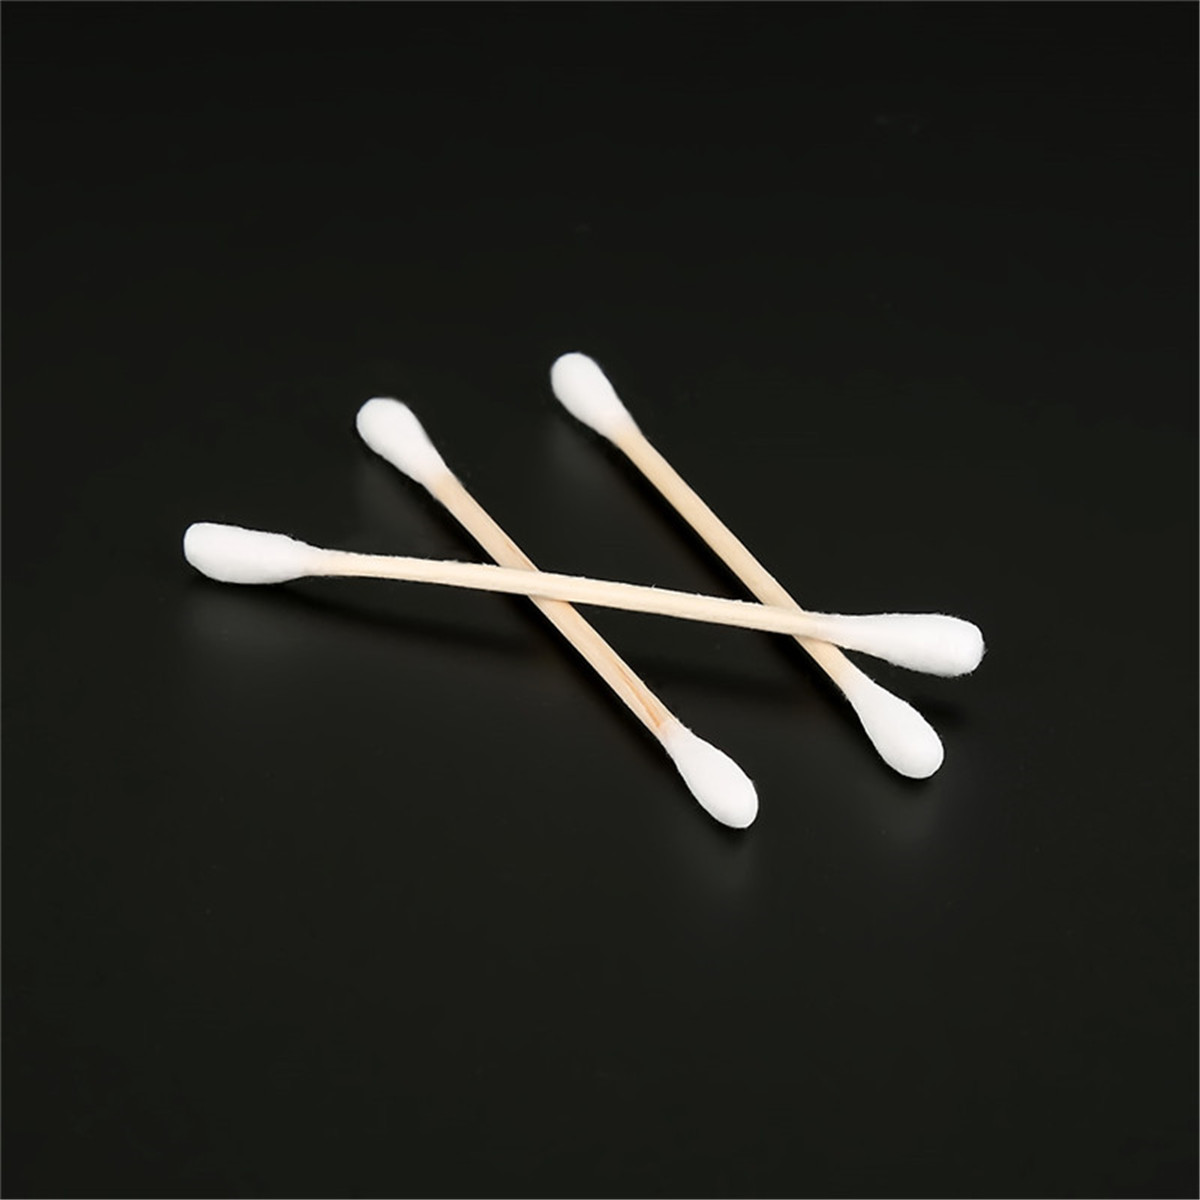 100x-Cotton-Swabs-Swab-Applicator-Q-Tips-Double-Head-Wooden-Stick-Cleaning-Tools-1582736-8